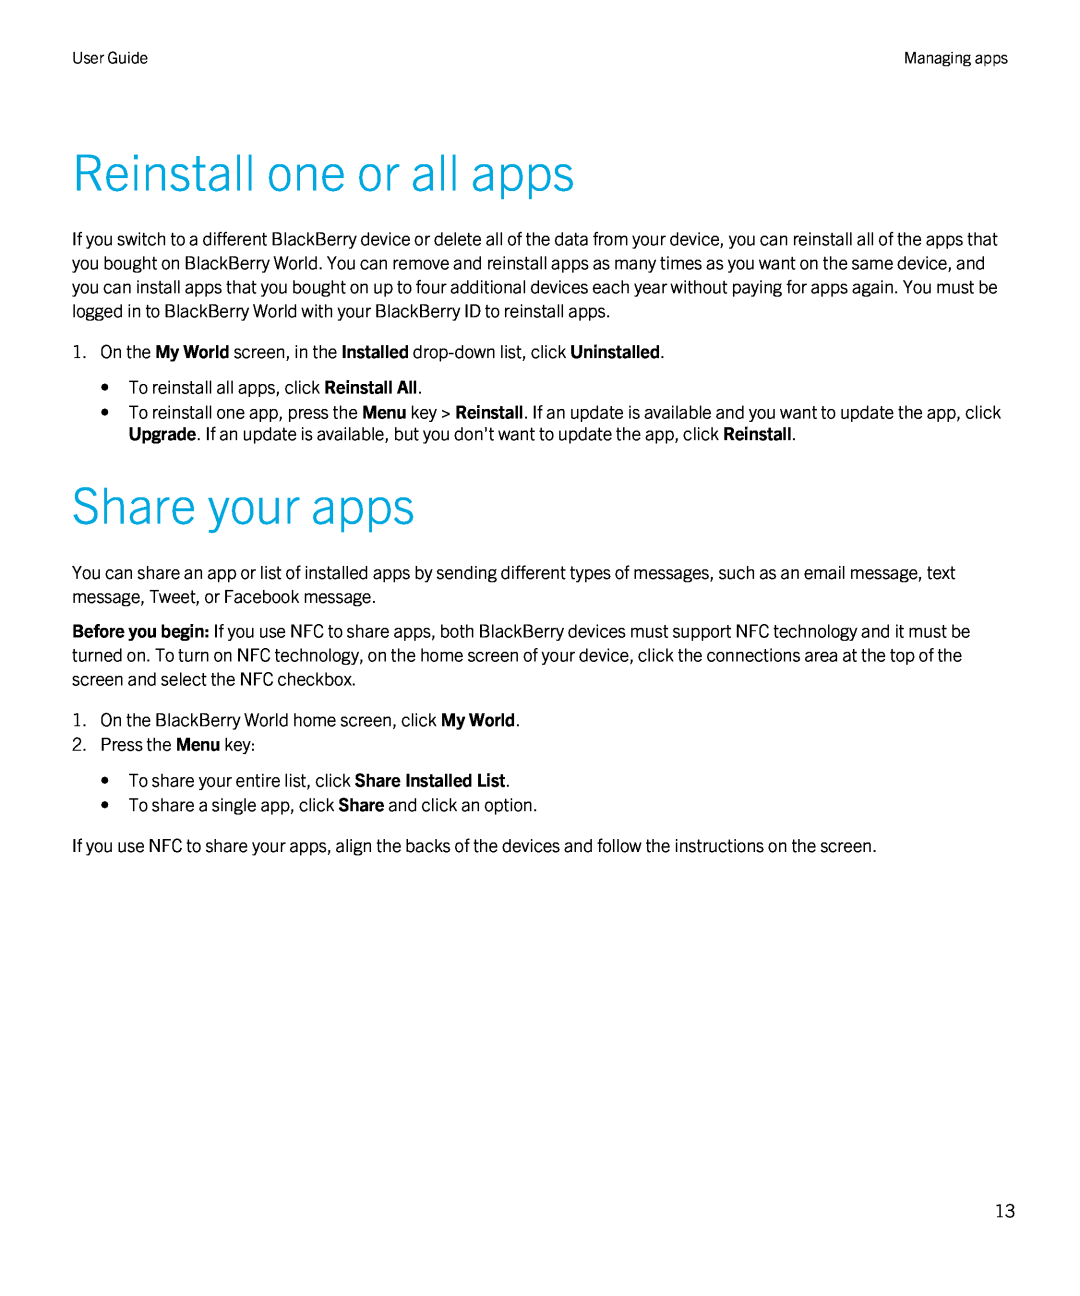 Blackberry 4.3 manual Reinstall one or all apps, Share your apps 